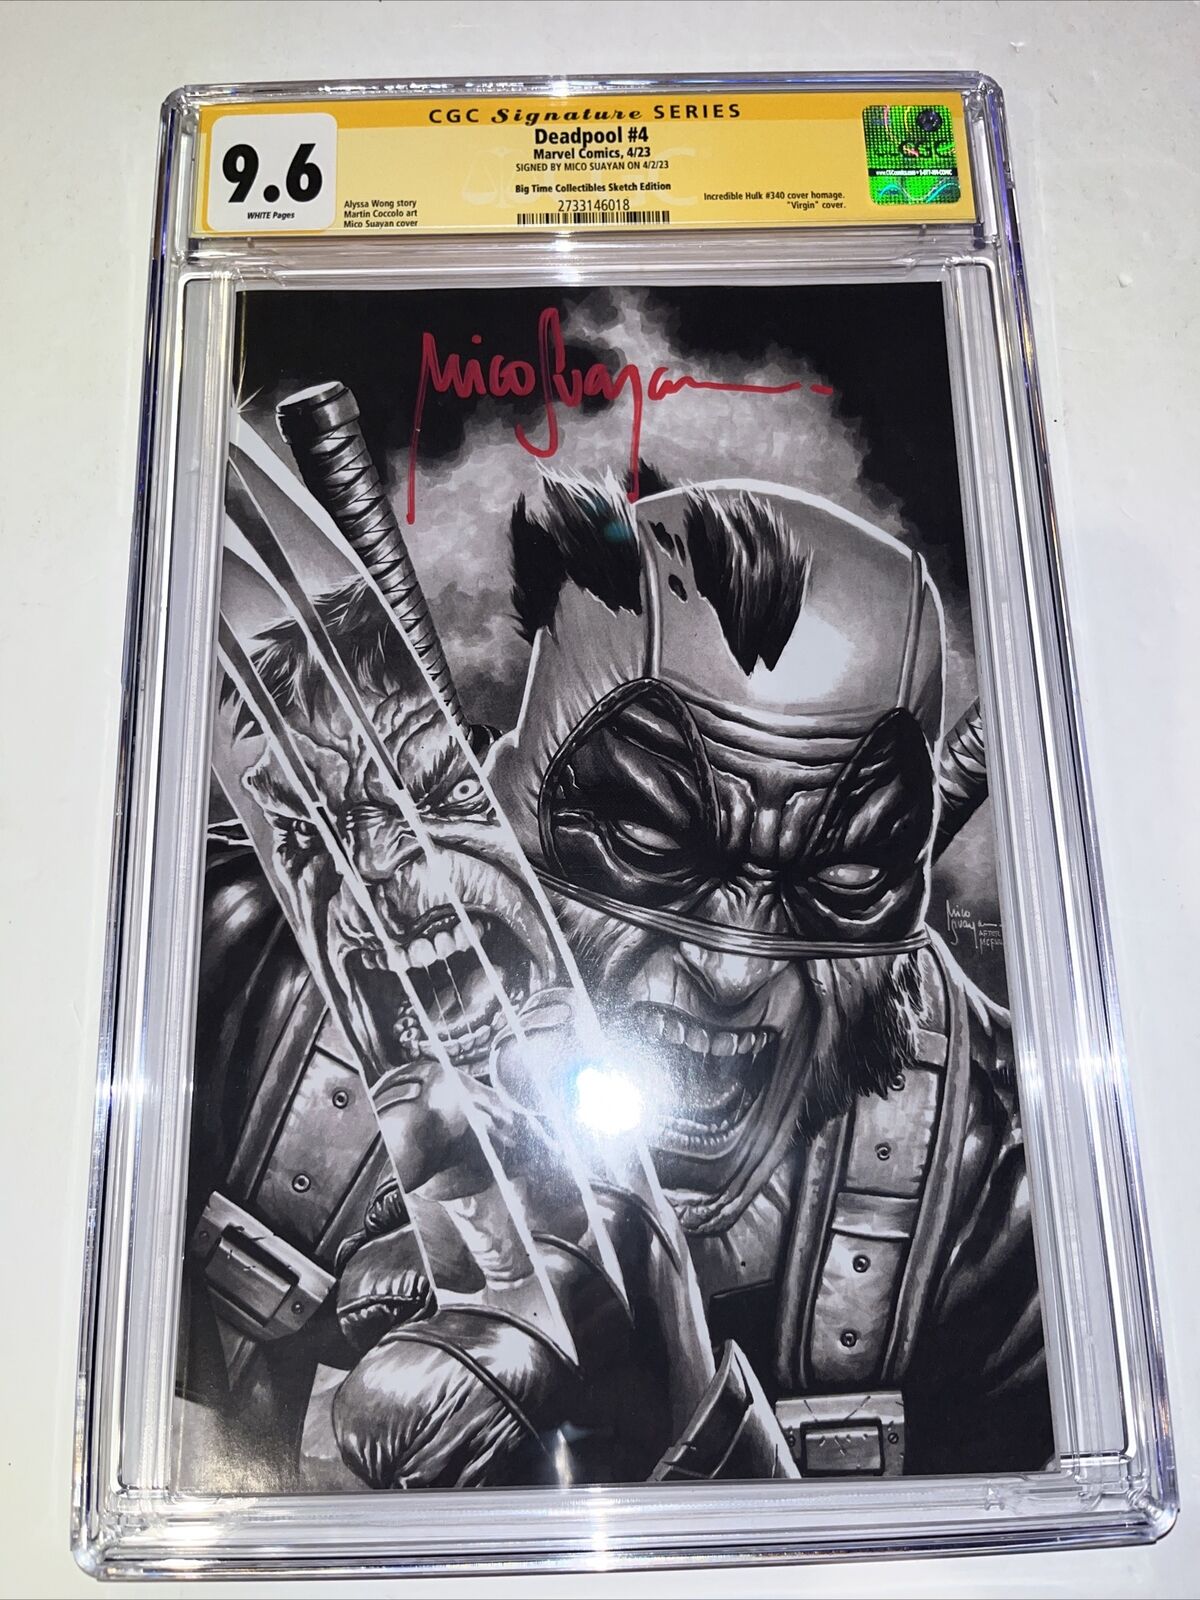 Deadpool (2023) # 4 (CGC 9.6 SS) Signed Mico Suayan • Big Time Collectibles